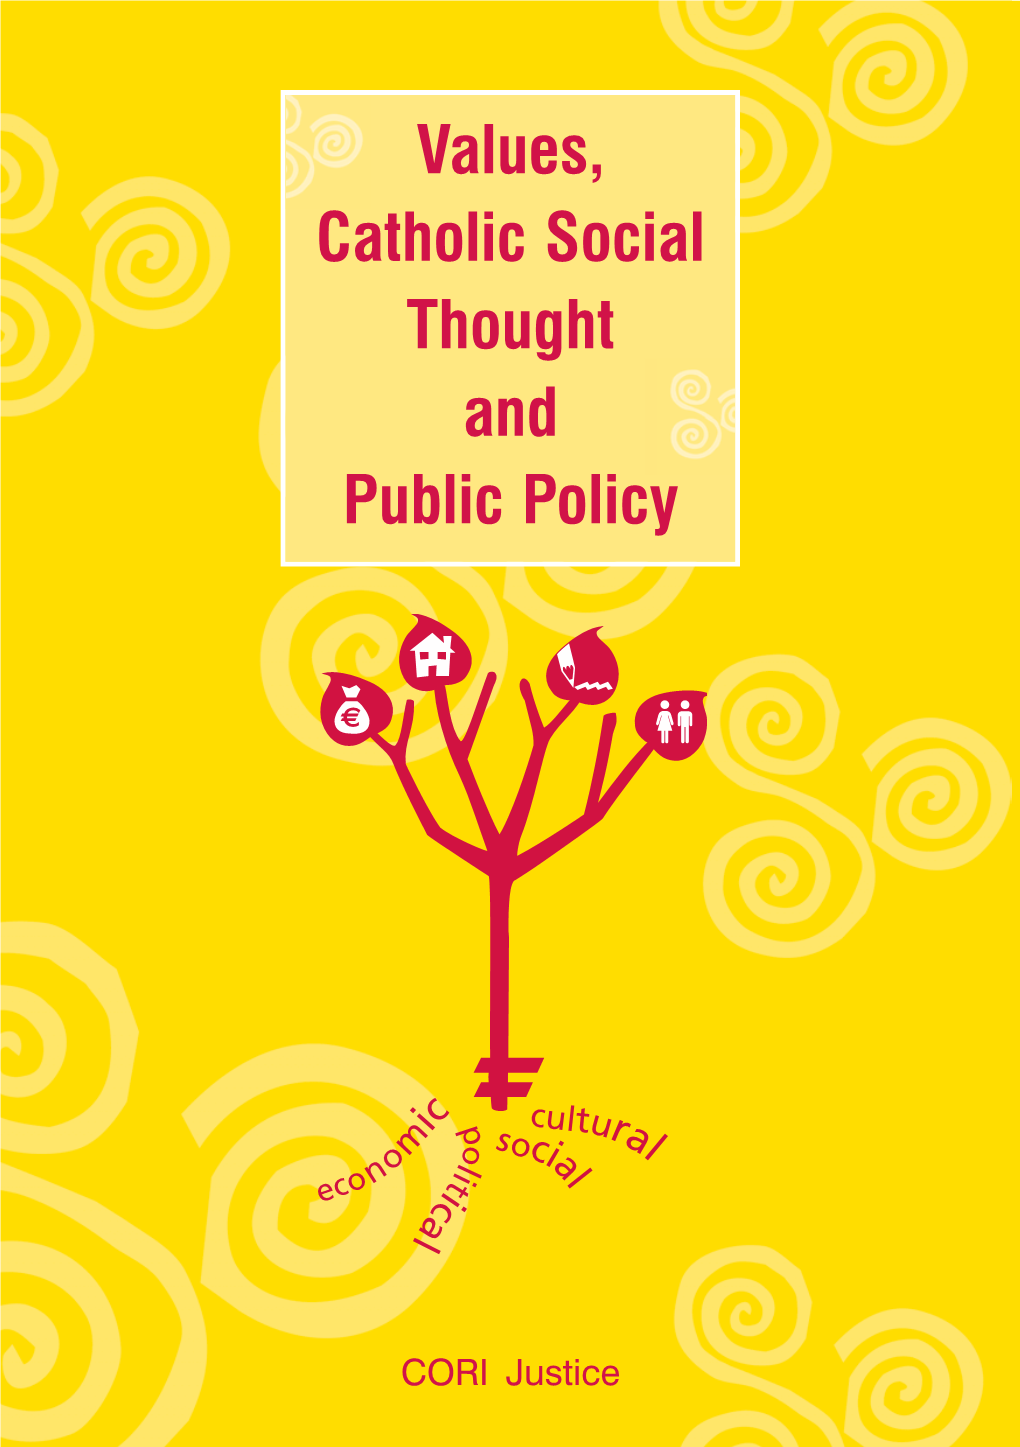 Values, Catholic Social Thought and Public Policy